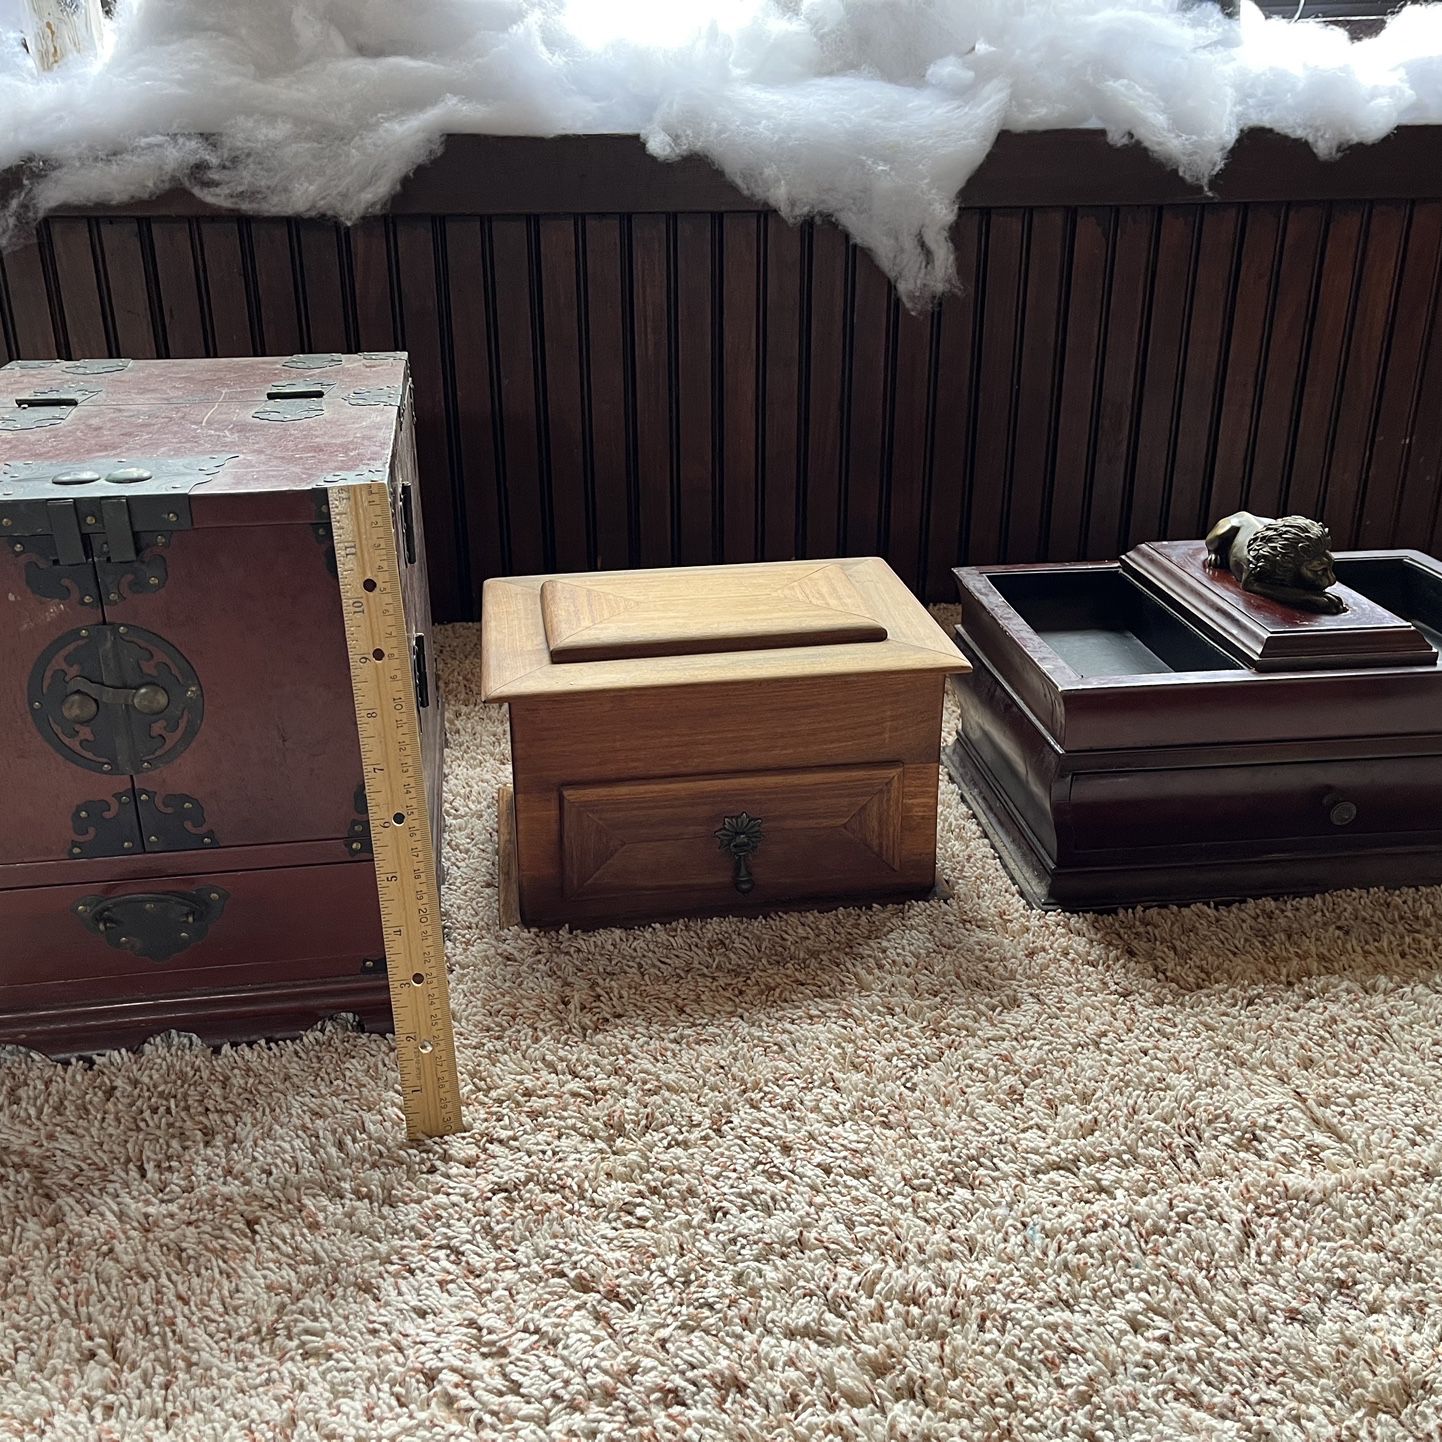 Jewelry Box 3 Boxes Gold Silver Storage Wood Wooden Vintage Estate Lot Retro Antique Patina Old